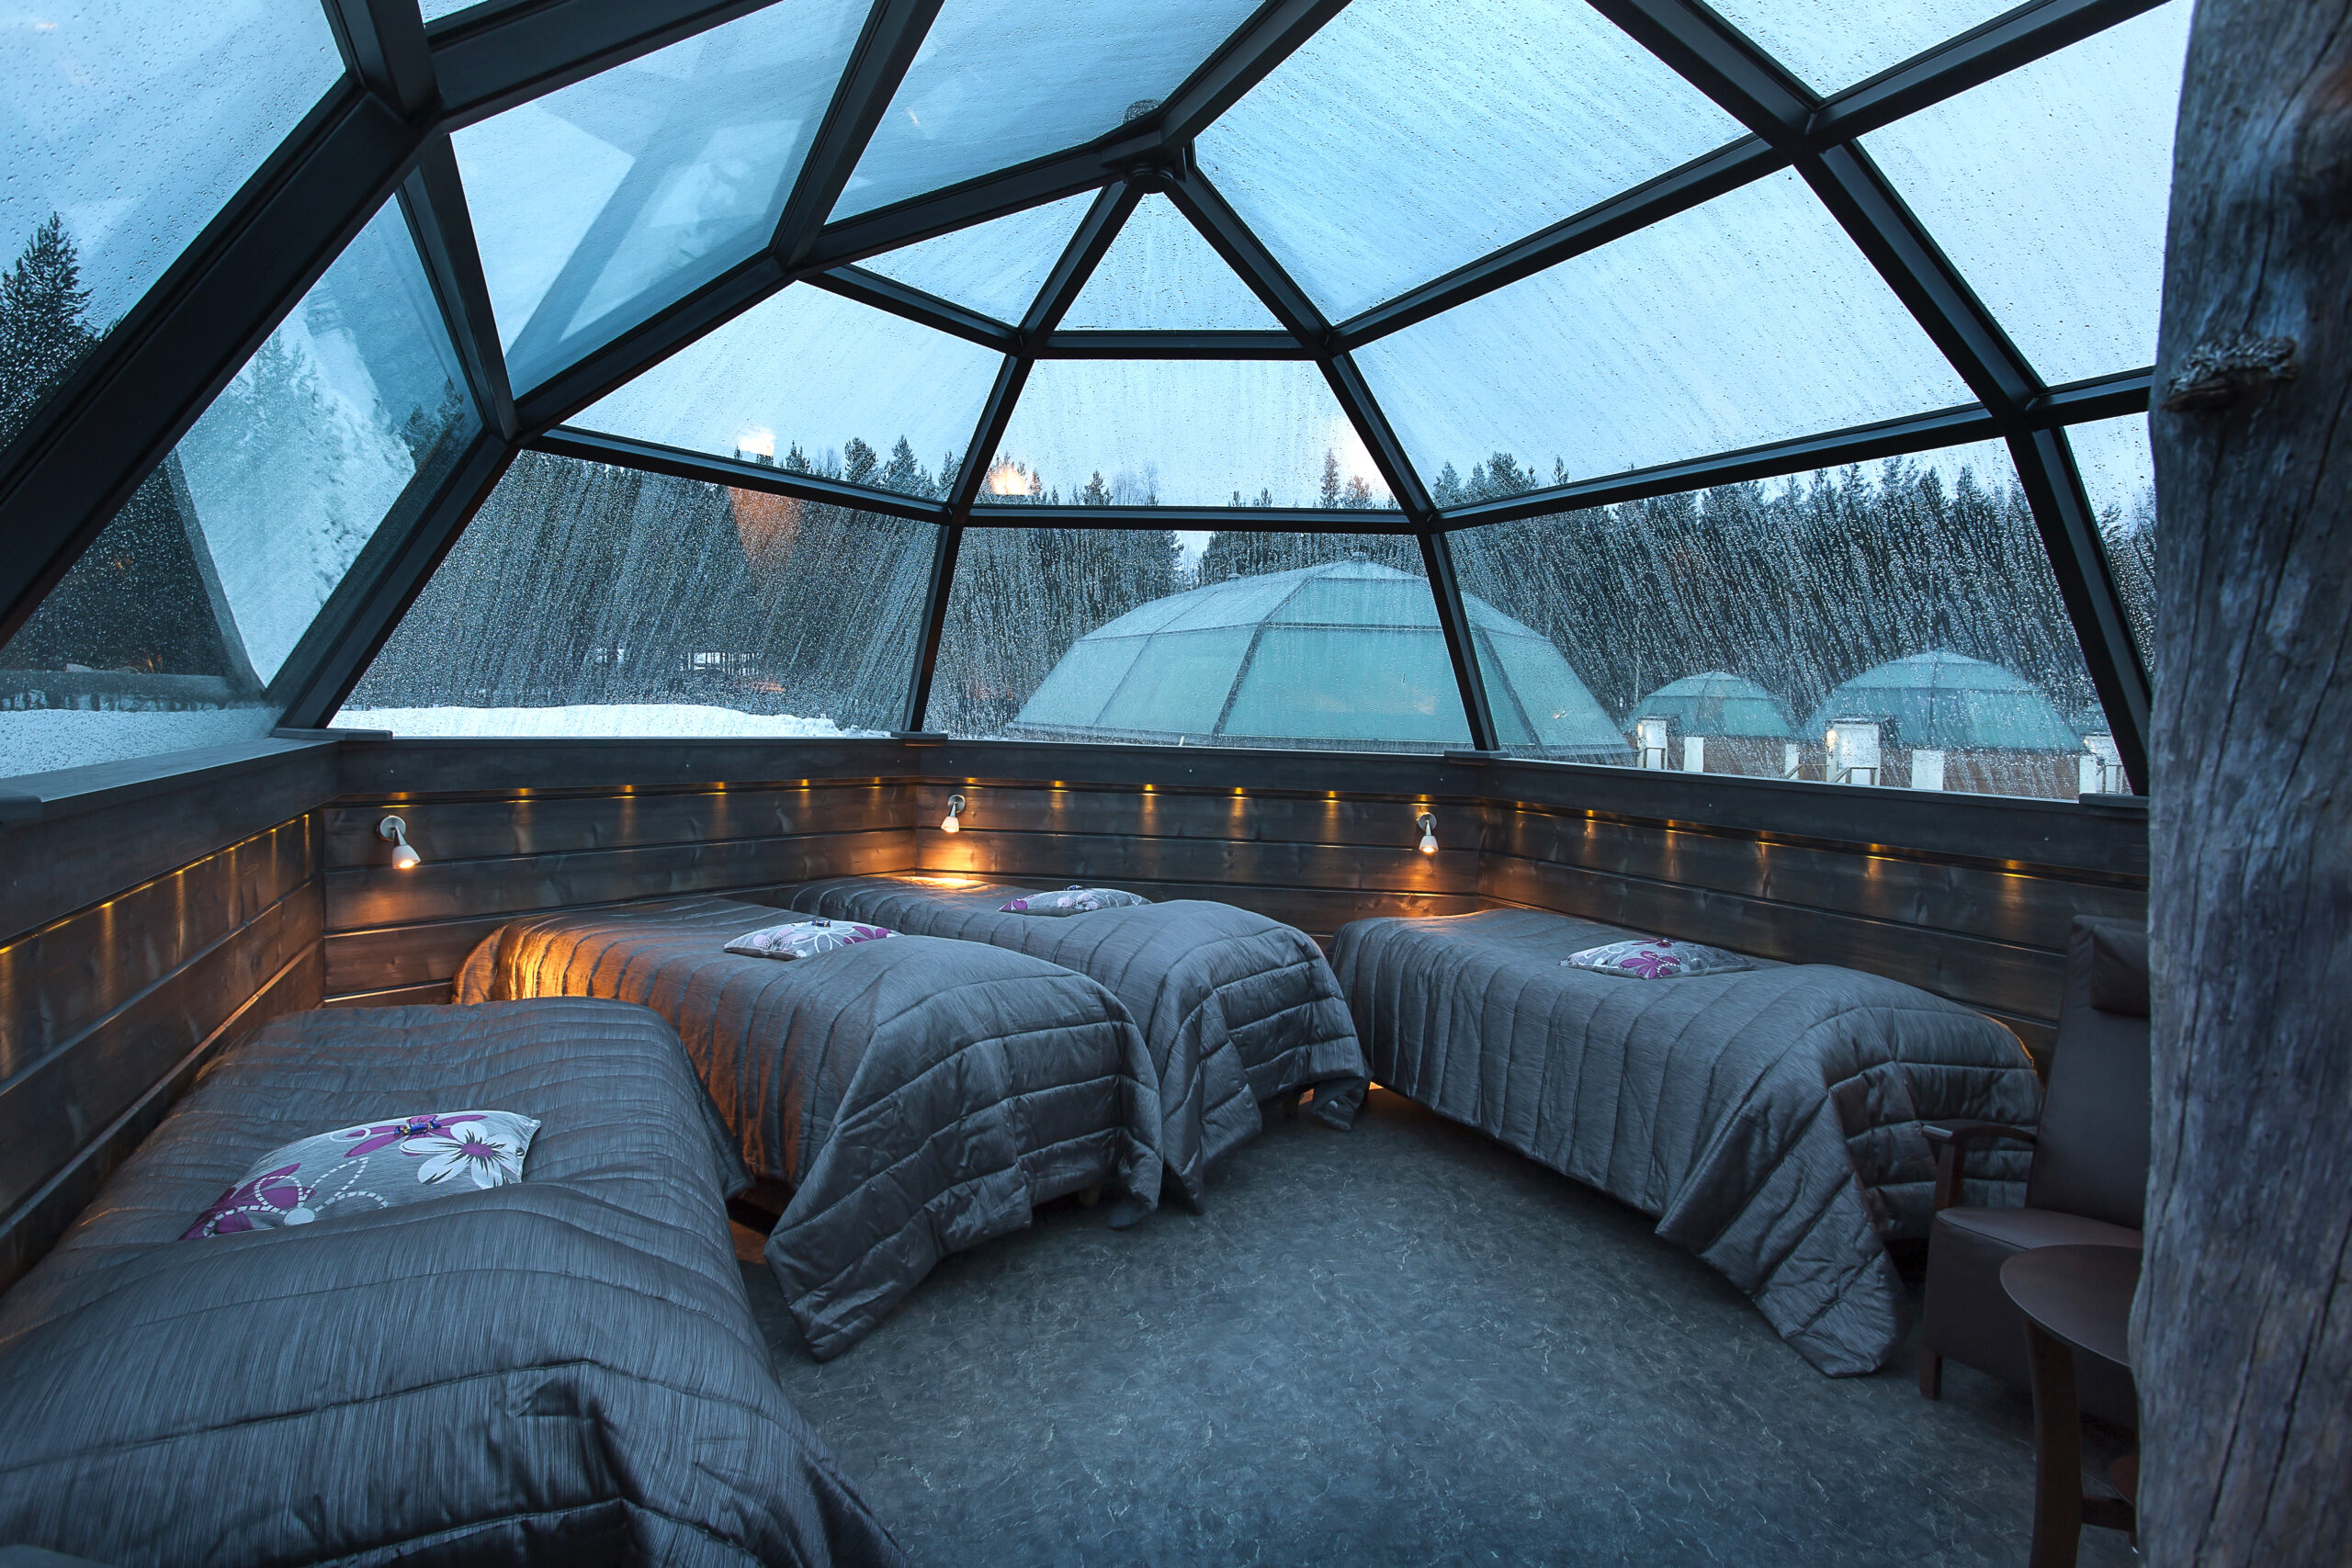 Family glass igloo can fit 5 beds